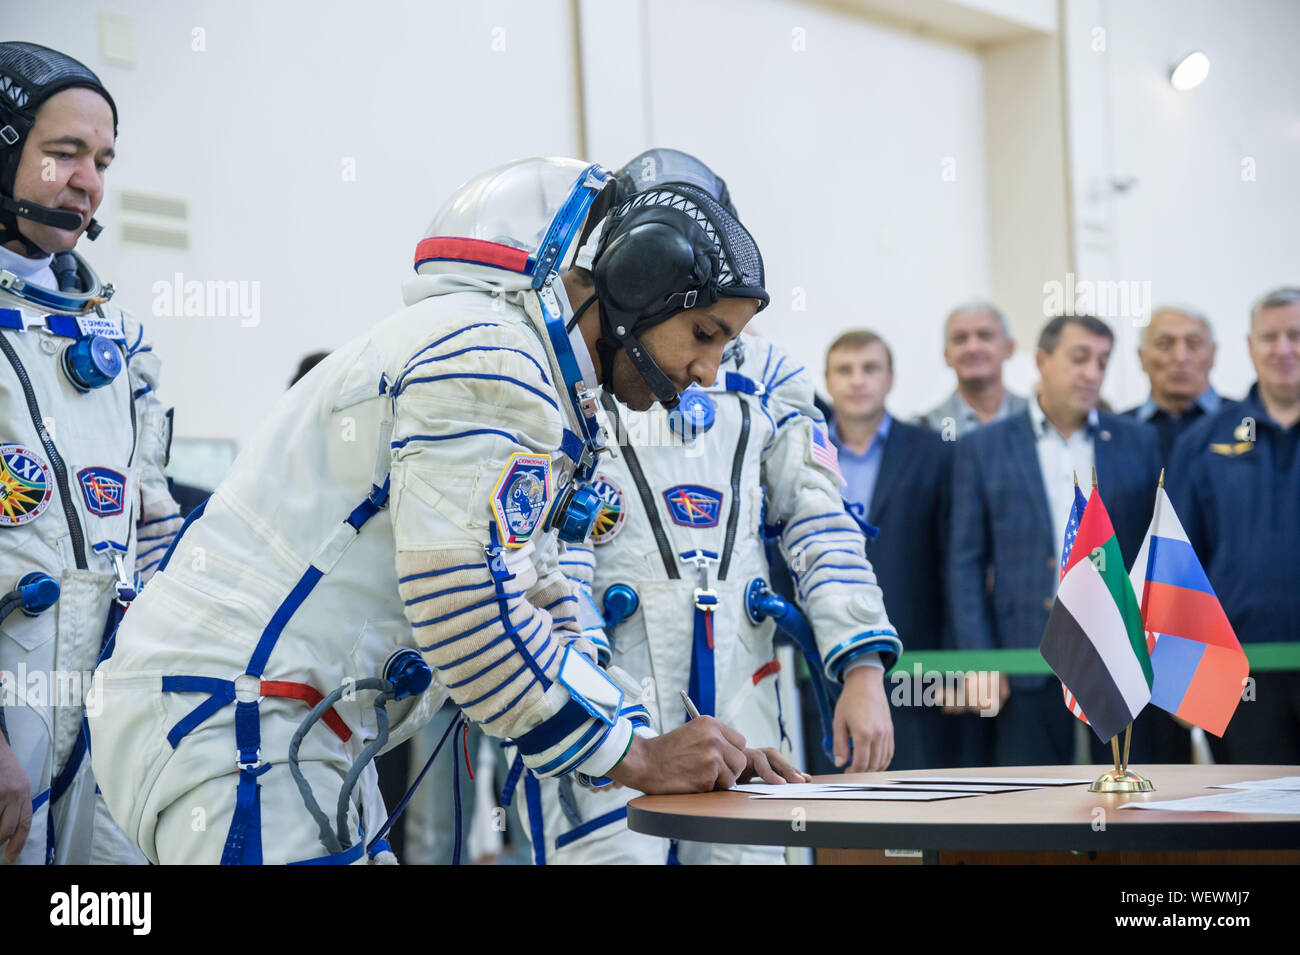 Star City, Russia. 30 August 2019. International Space Station Expedition 61 spaceflight participant Hazzaa Ali Almansoori of the United Arab Emirates in his Sokol space suit signs in for the final crew qualification exams at the Gagarin Cosmonaut Training Center August 30, 2019 in Star City, Russia. Expedition 61-62 is expected to launch to the International Space Station on September 25, 2019. Credit: NASA/Planetpix/Alamy Live News Stock Photo